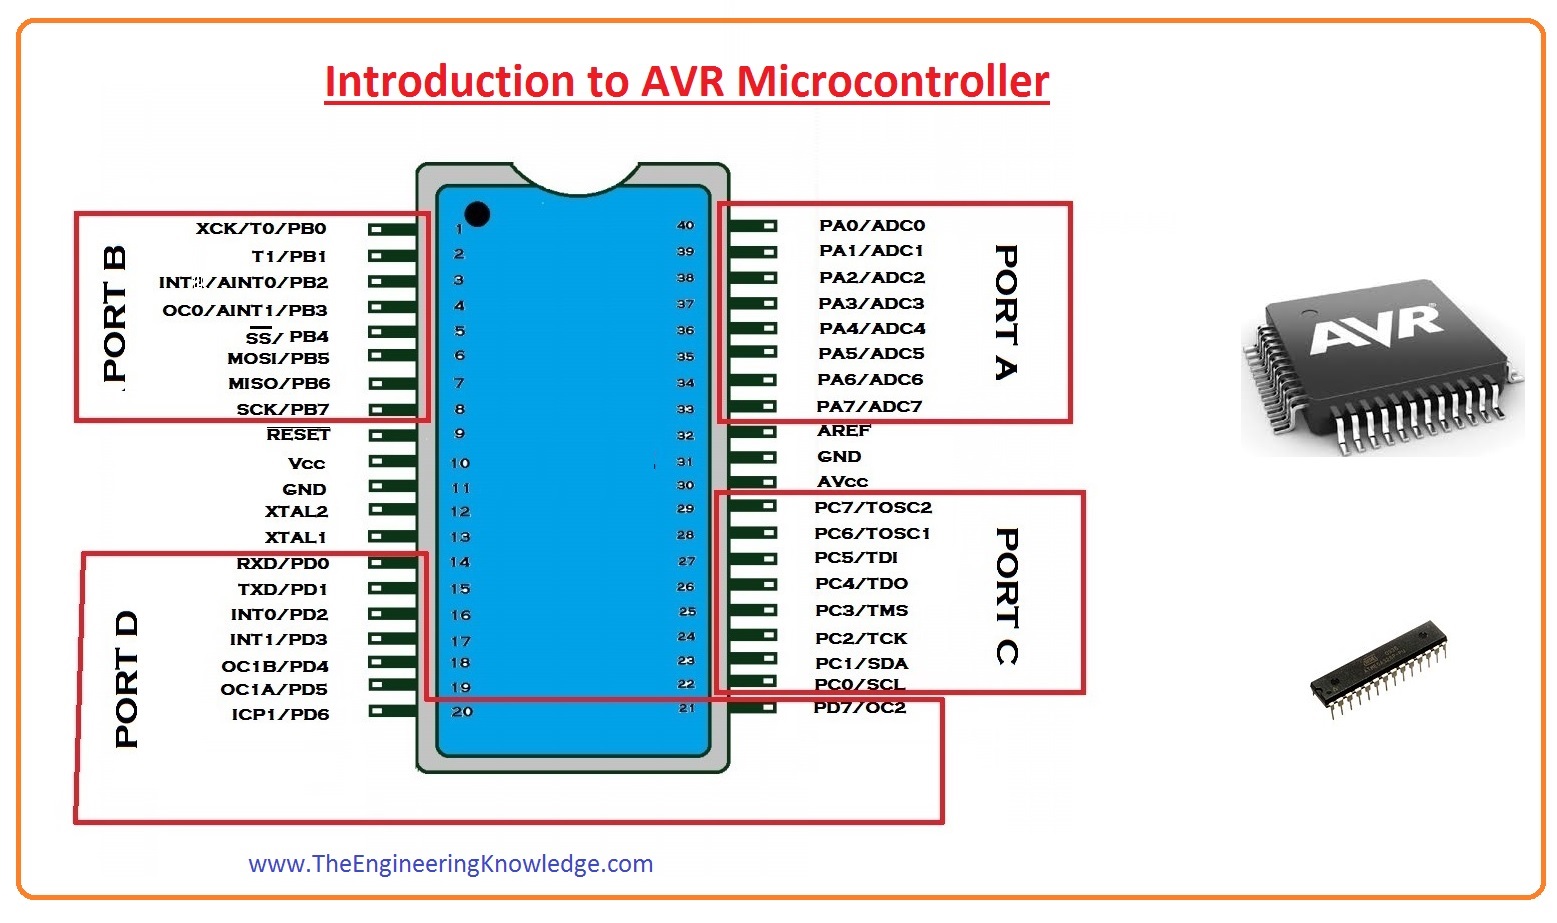 Introduction to AVR Microcontroller The Engineering Knowledge